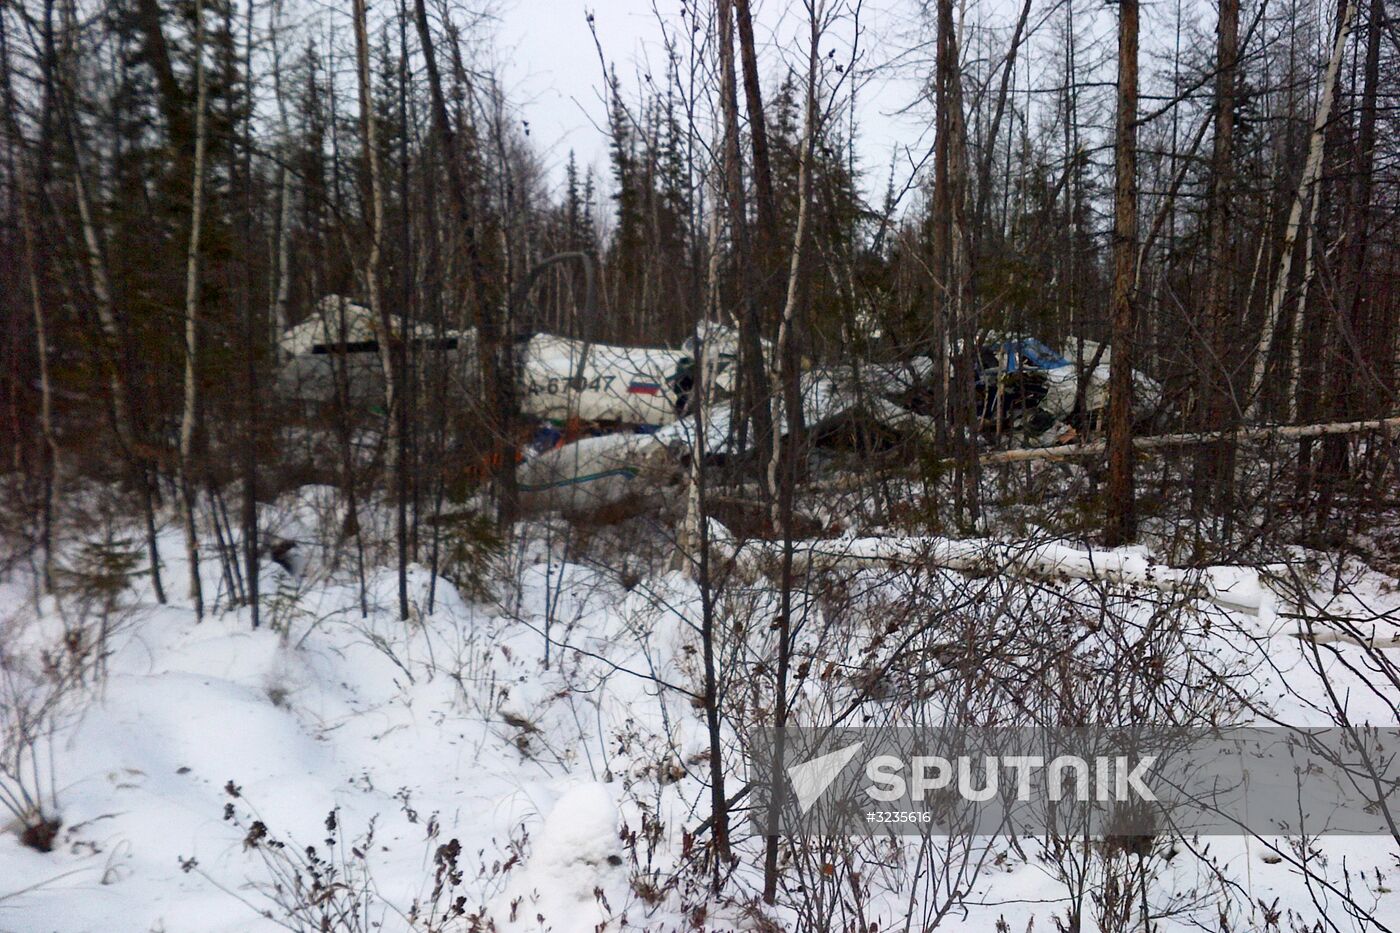 L-410 aircraft crashes in Khabarovsk Territory